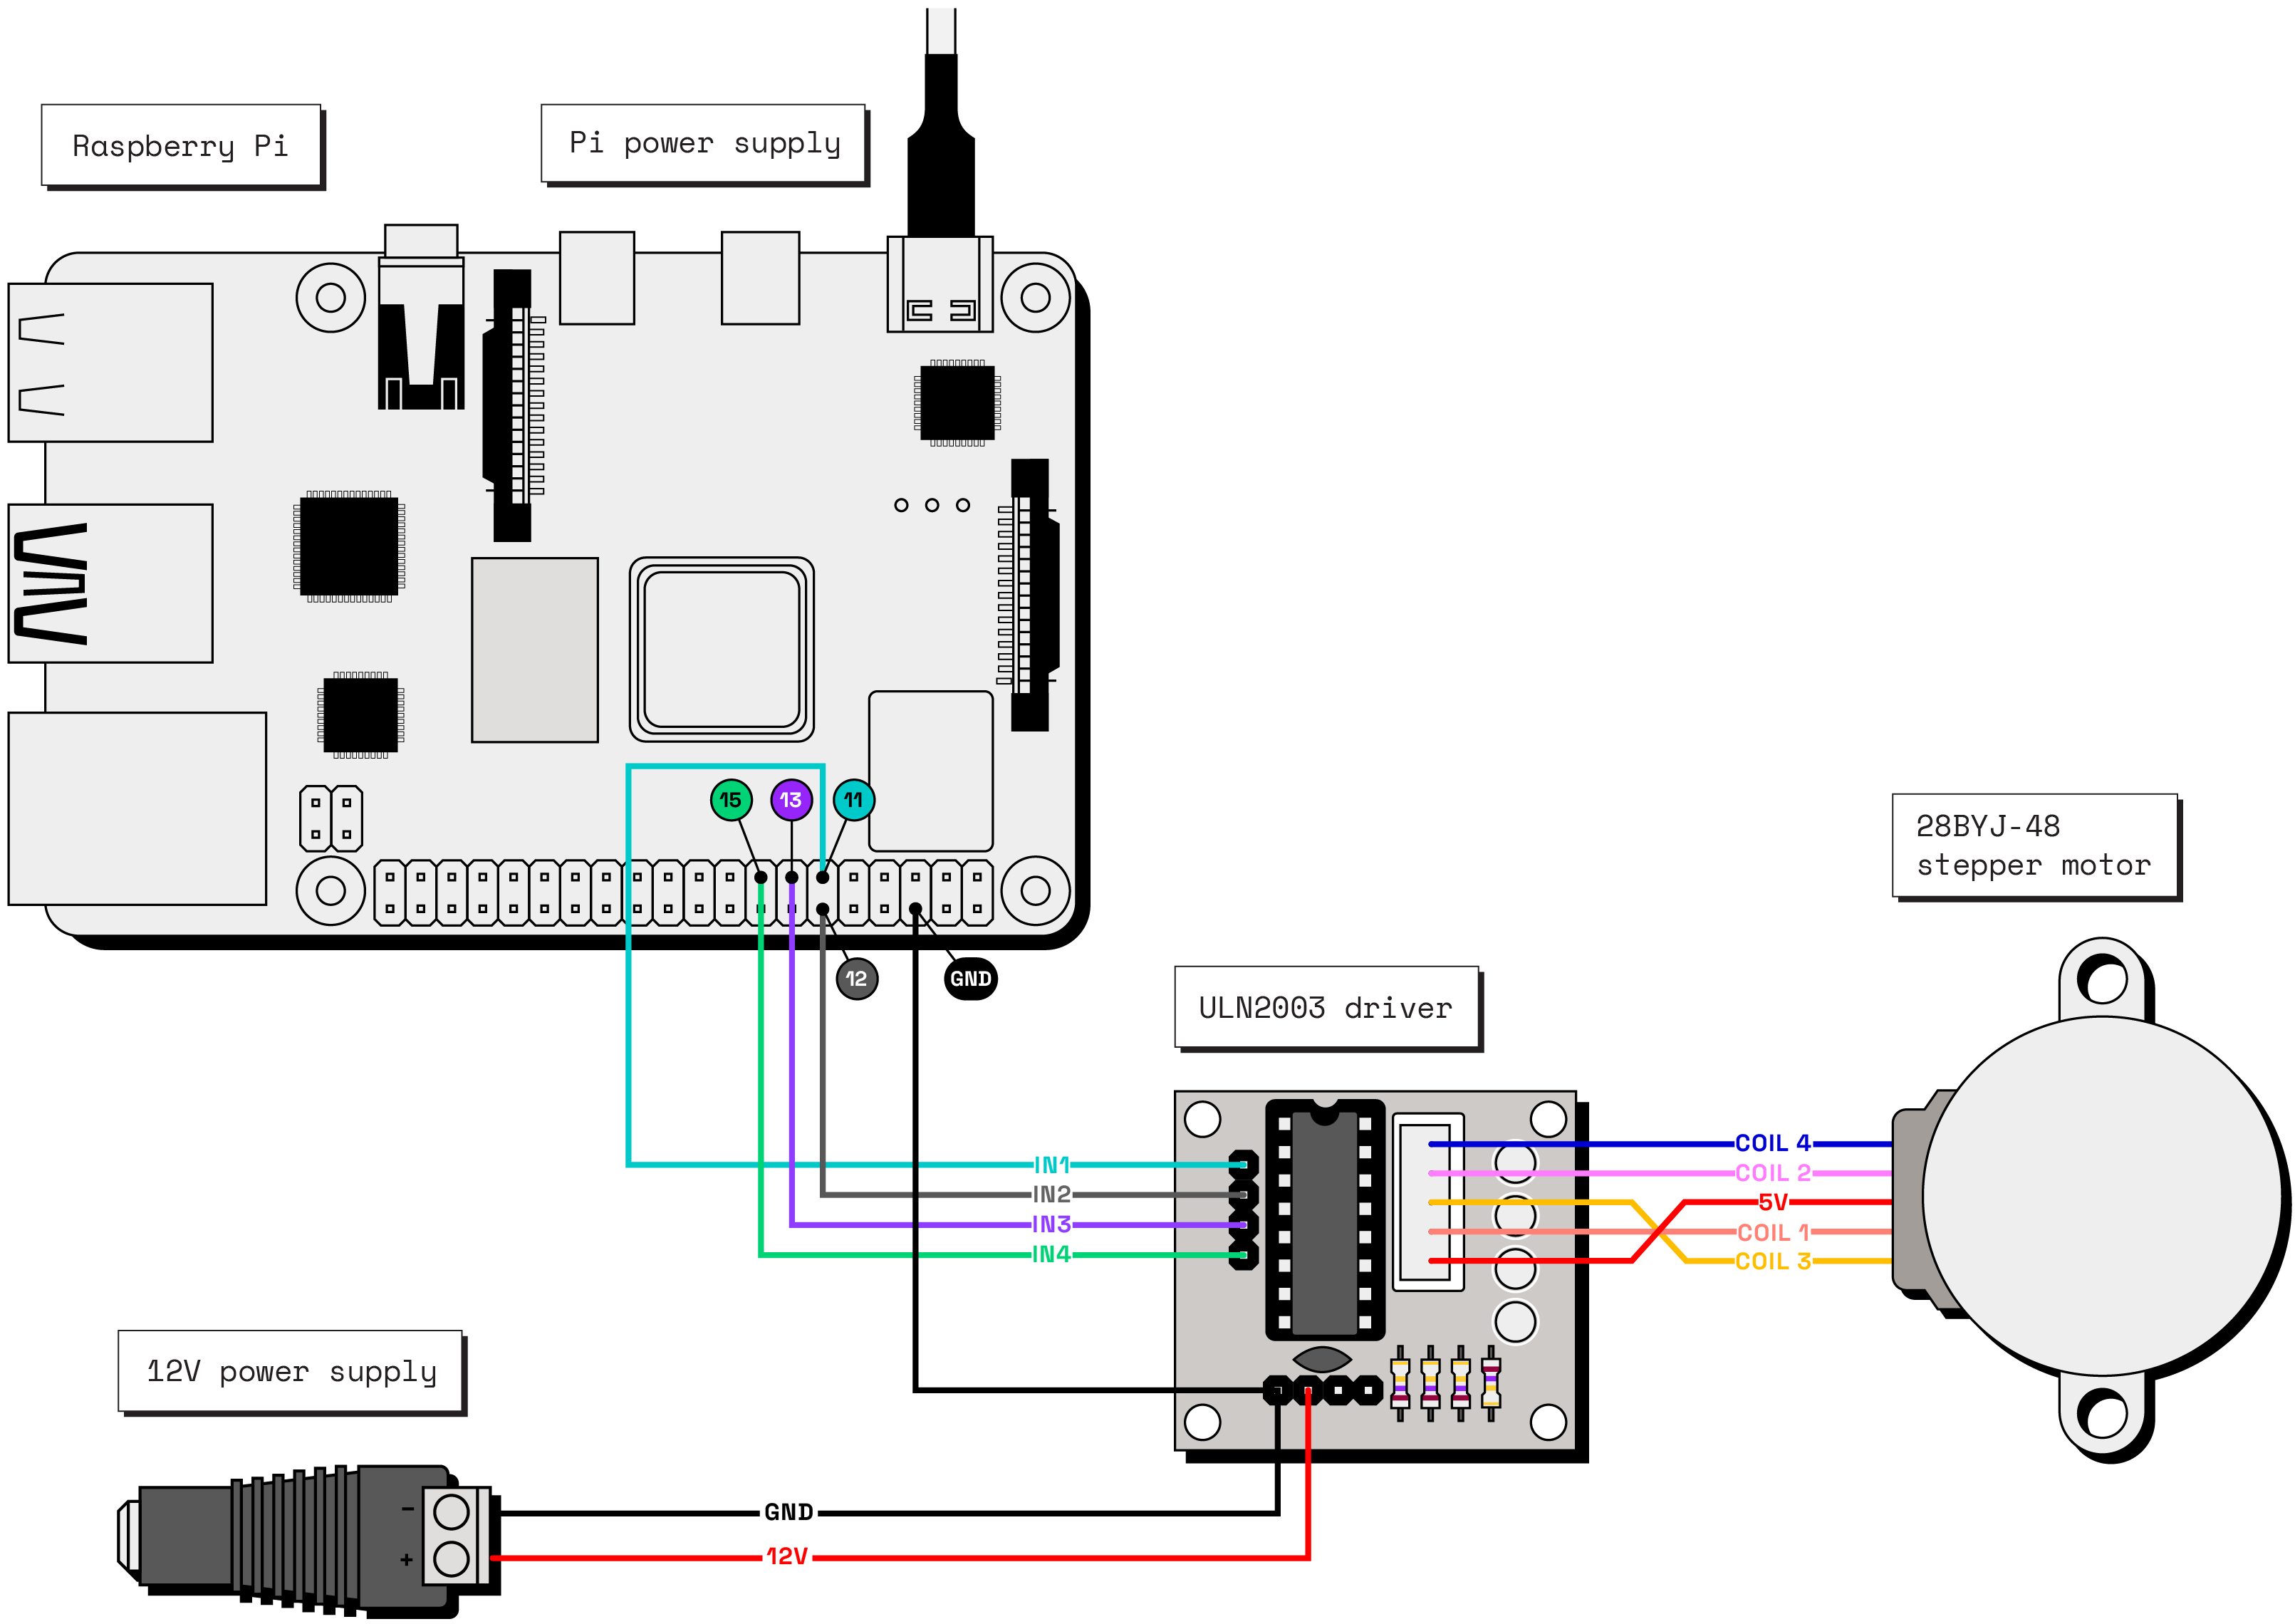 An example wiring diagram for a four wire 28BYJ-48 stepper motor driven by a ULN2003A driver chip breakout board. The driver is connected to a Raspberry Pi with four wires labeled IN1, IN2, IN3, and IN4. These are connected to Pi pins 11, 12, 13 and 15, respectively. A separate 12V power supply is attached to the motor driver to power the motor.